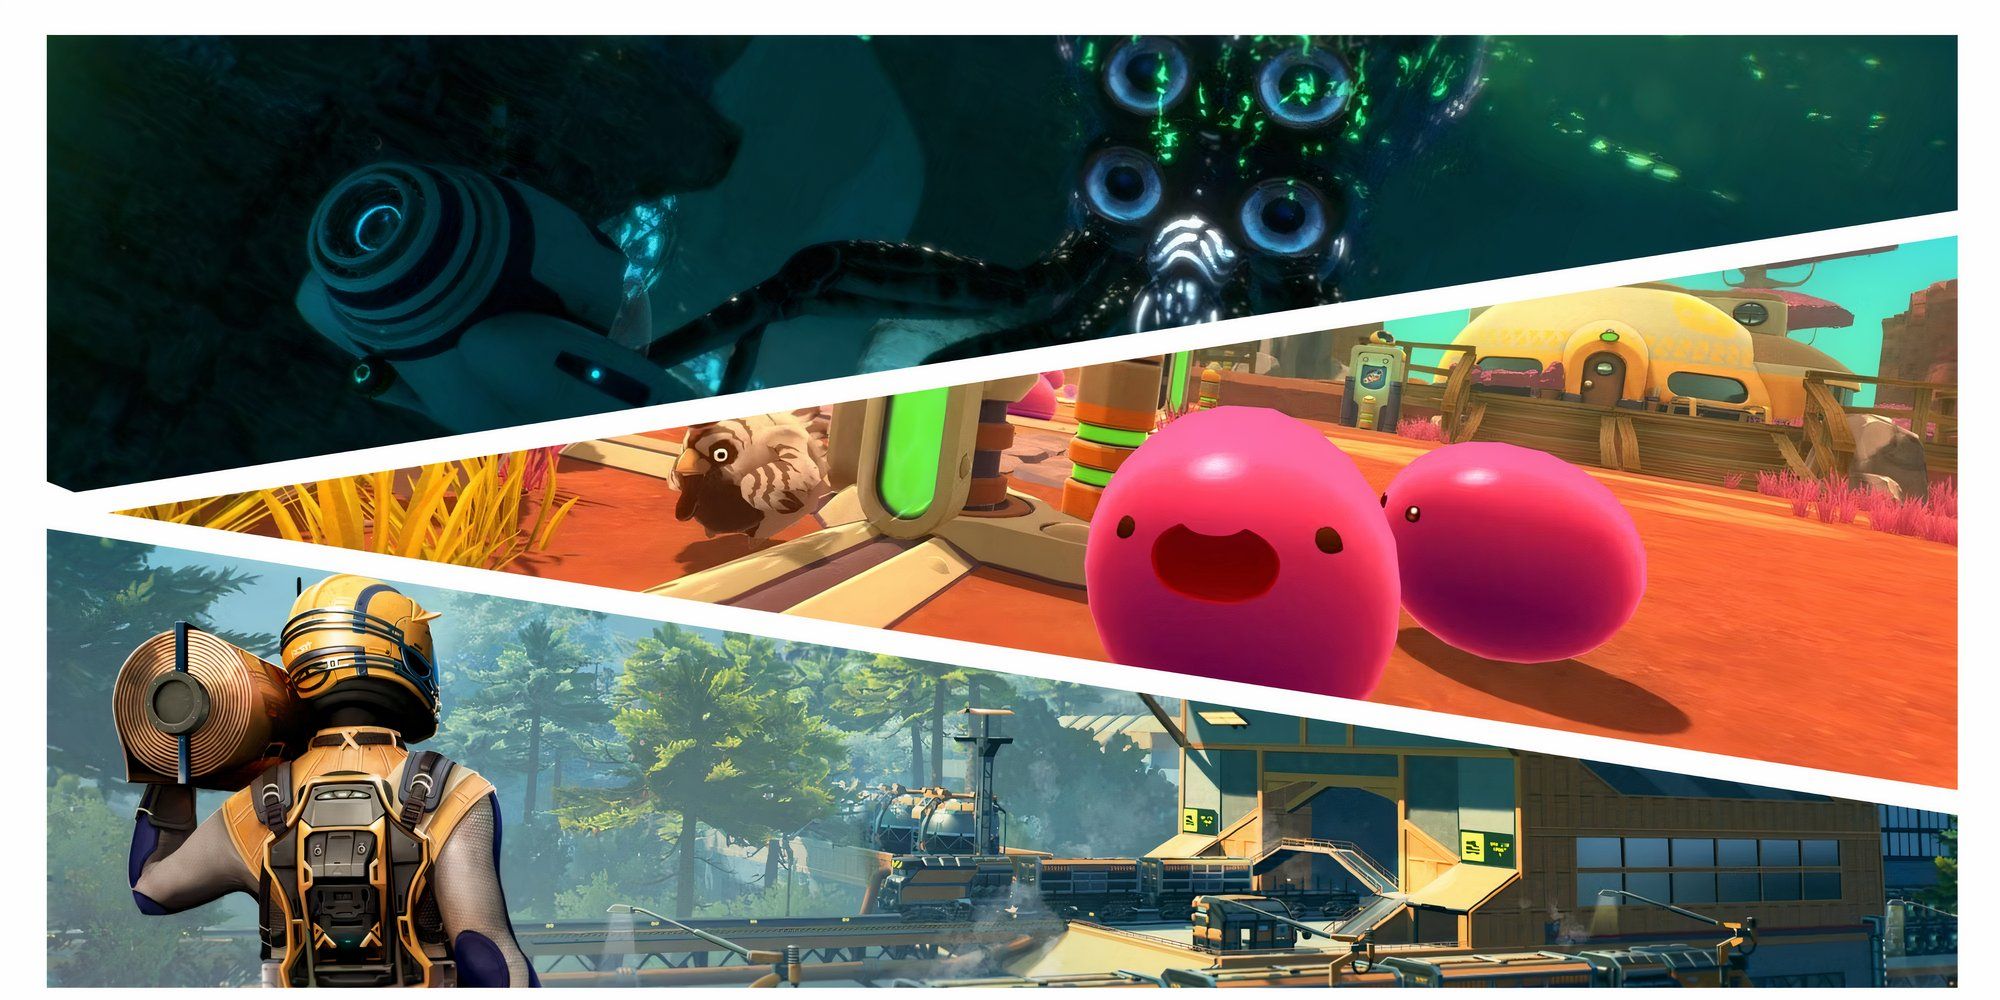 Subnautica, Slime Rancher, and Satisfactory